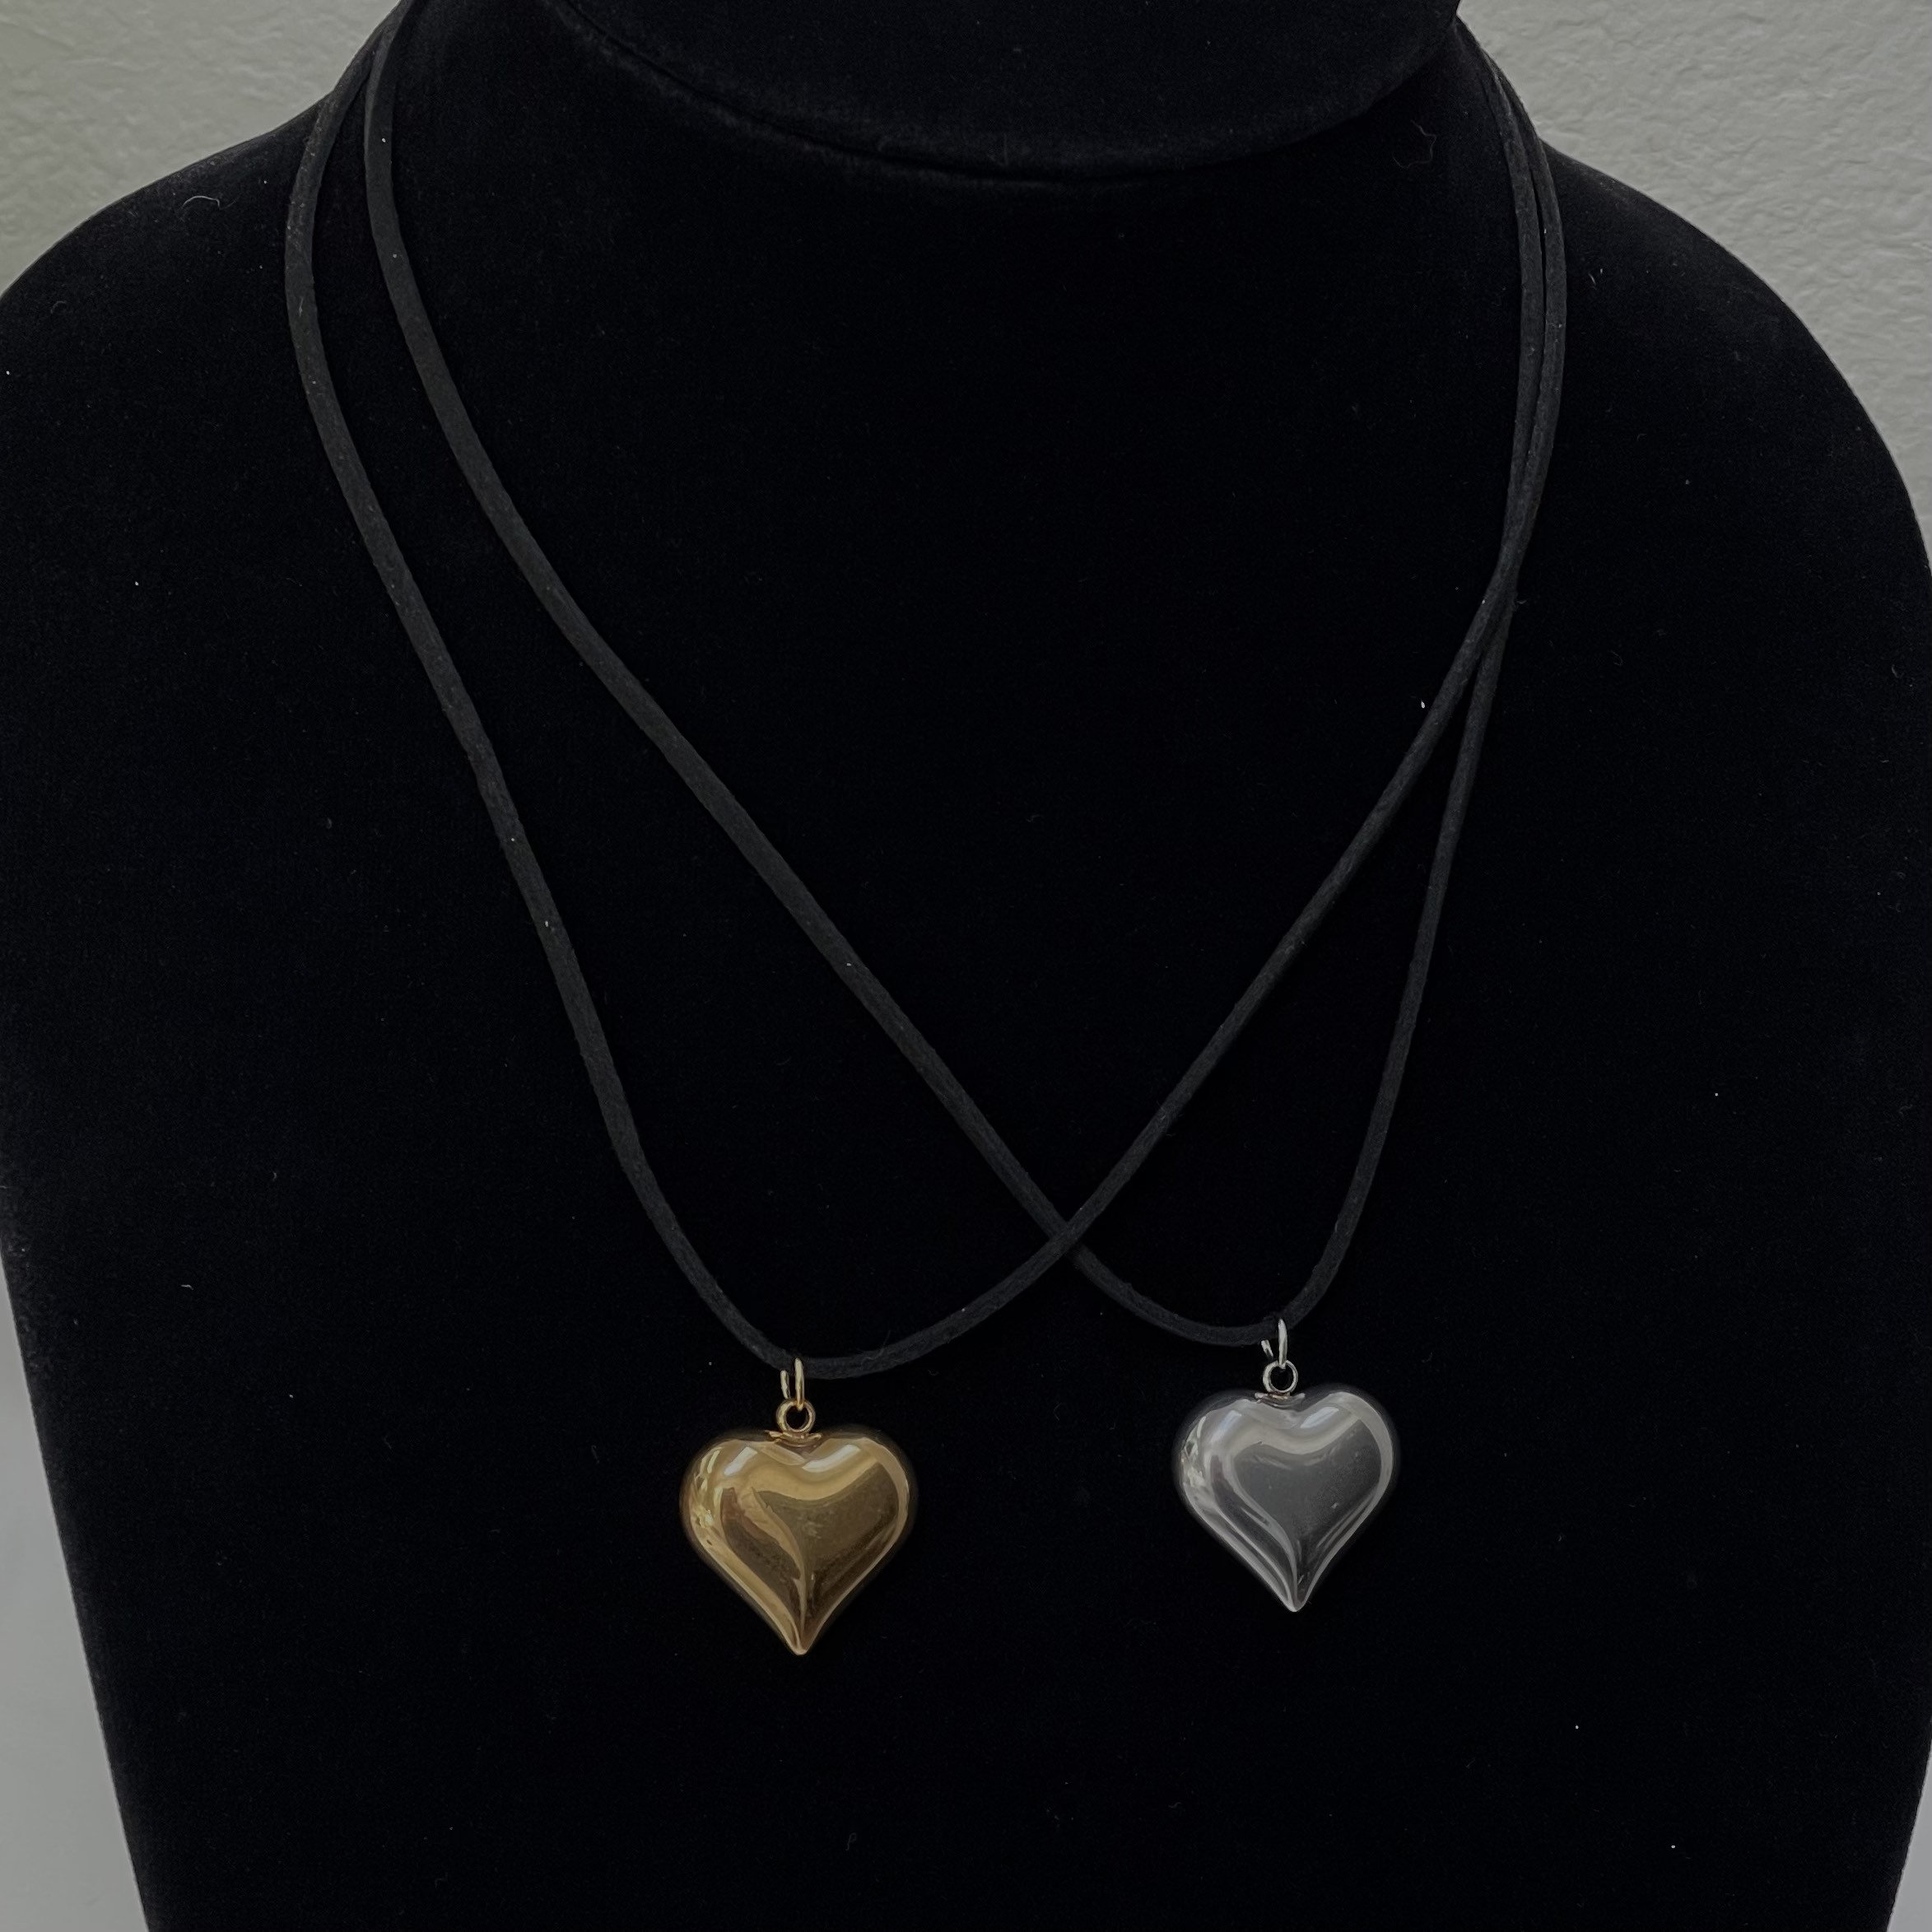 Gold Puffed Heart String Necklace Black Cord Long Wrap Tie Choker XL or  Mini Stainless Steel Chunky 3D Puffy Pendant Handmade Unisex Jewelry 